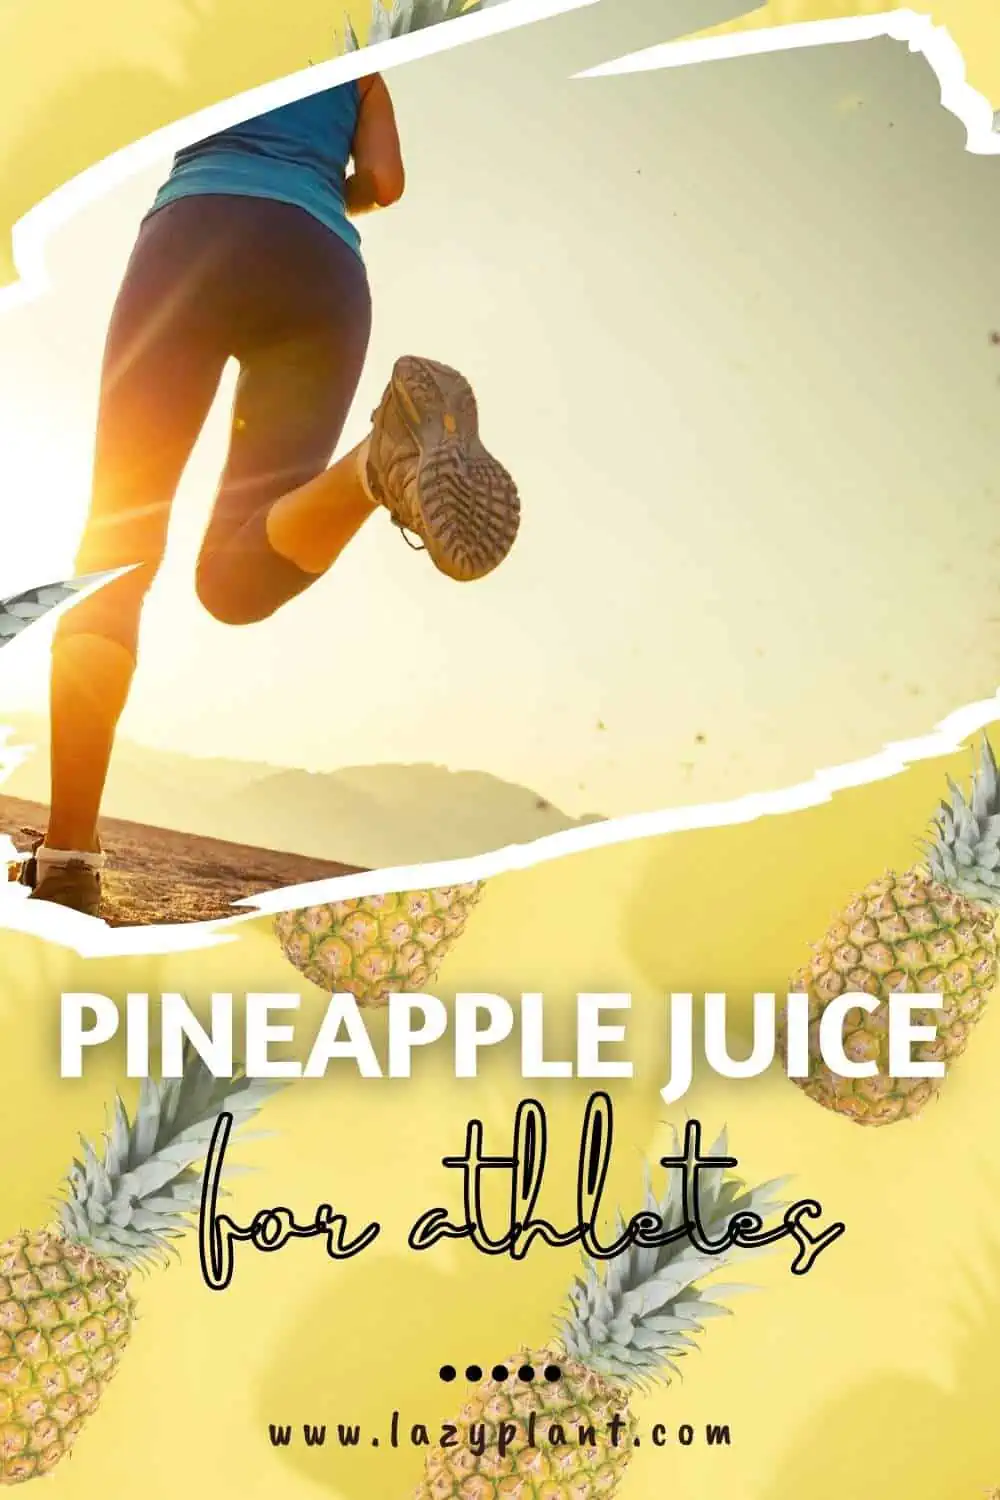 Drink pineapple juice after exercise. It’s the only food naturally containing bromelain!